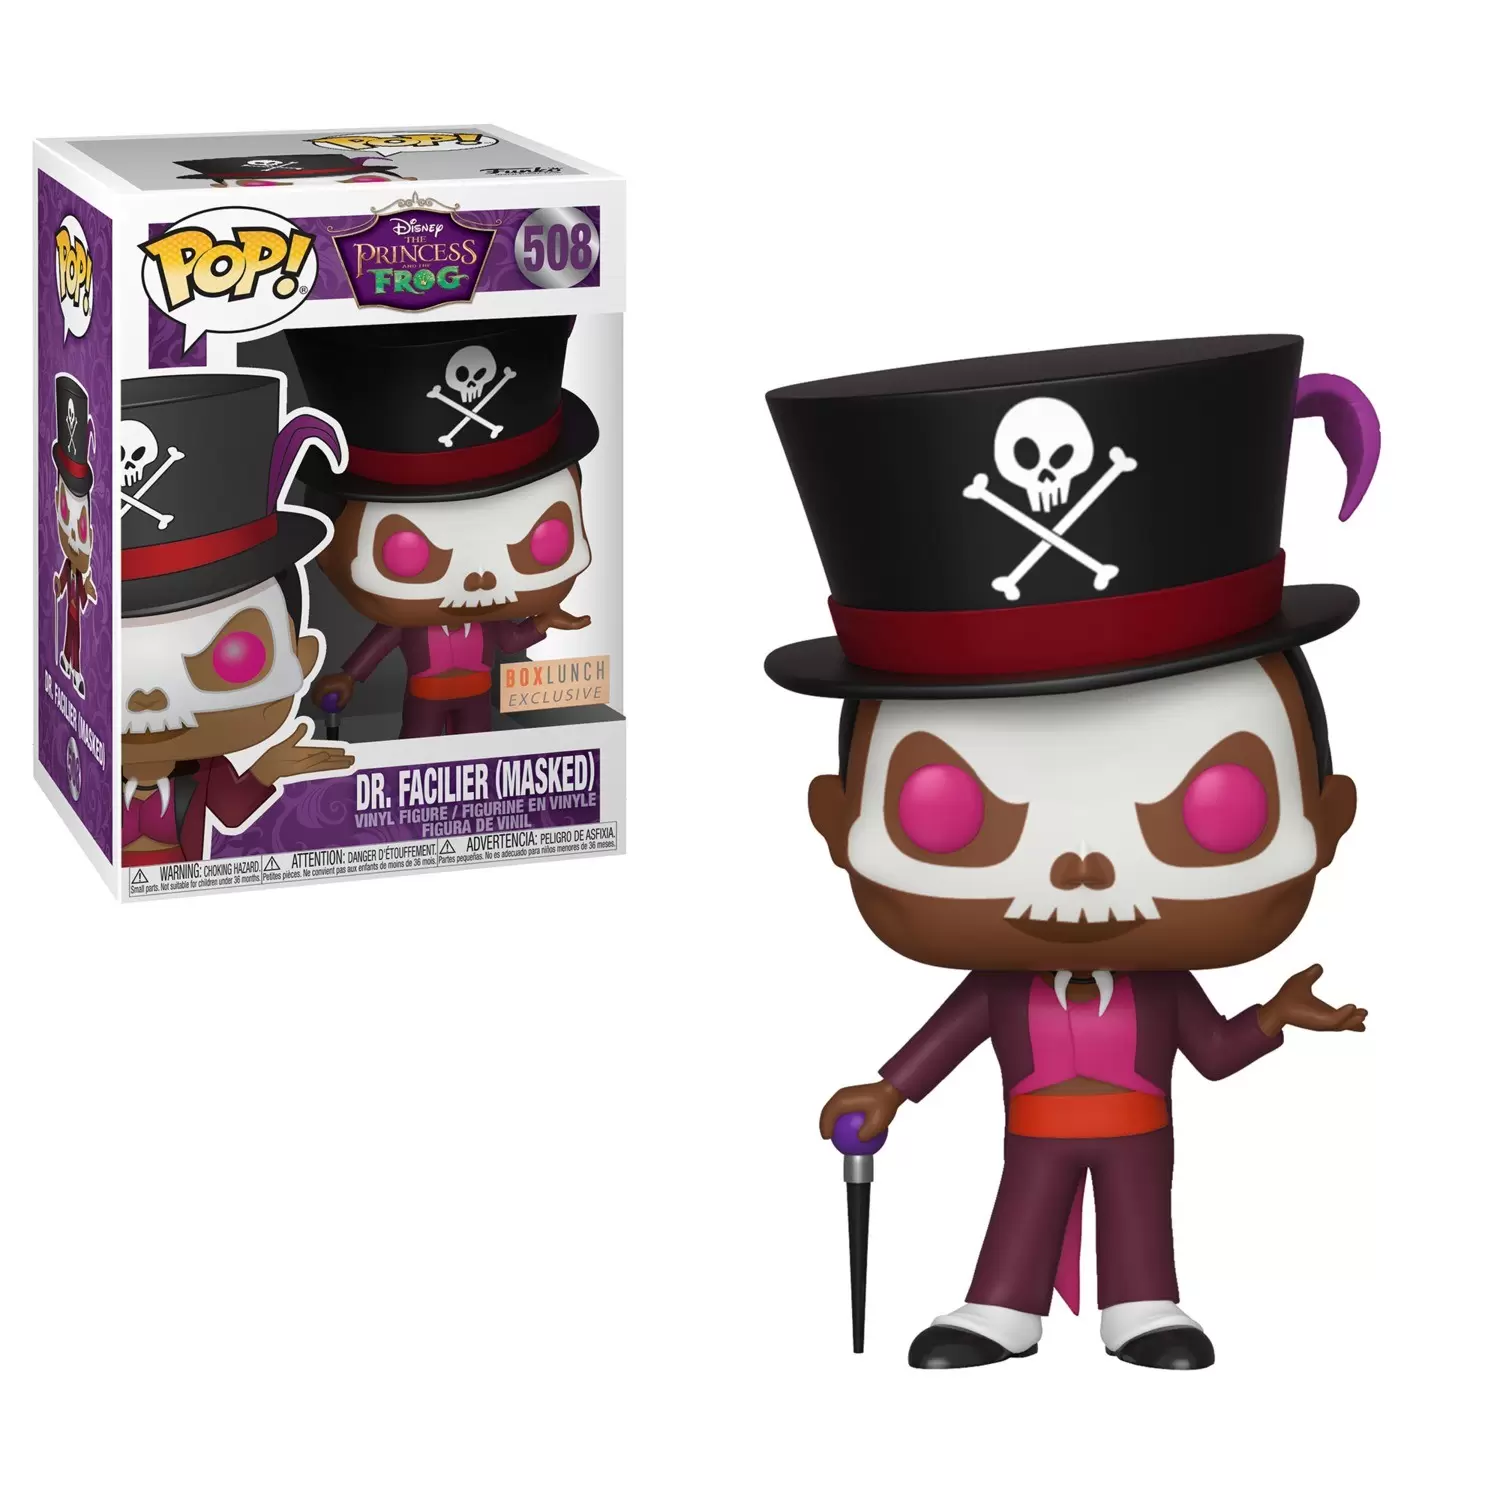 POP! Disney - The Princess and the Frog - Dr. Facilier Masked